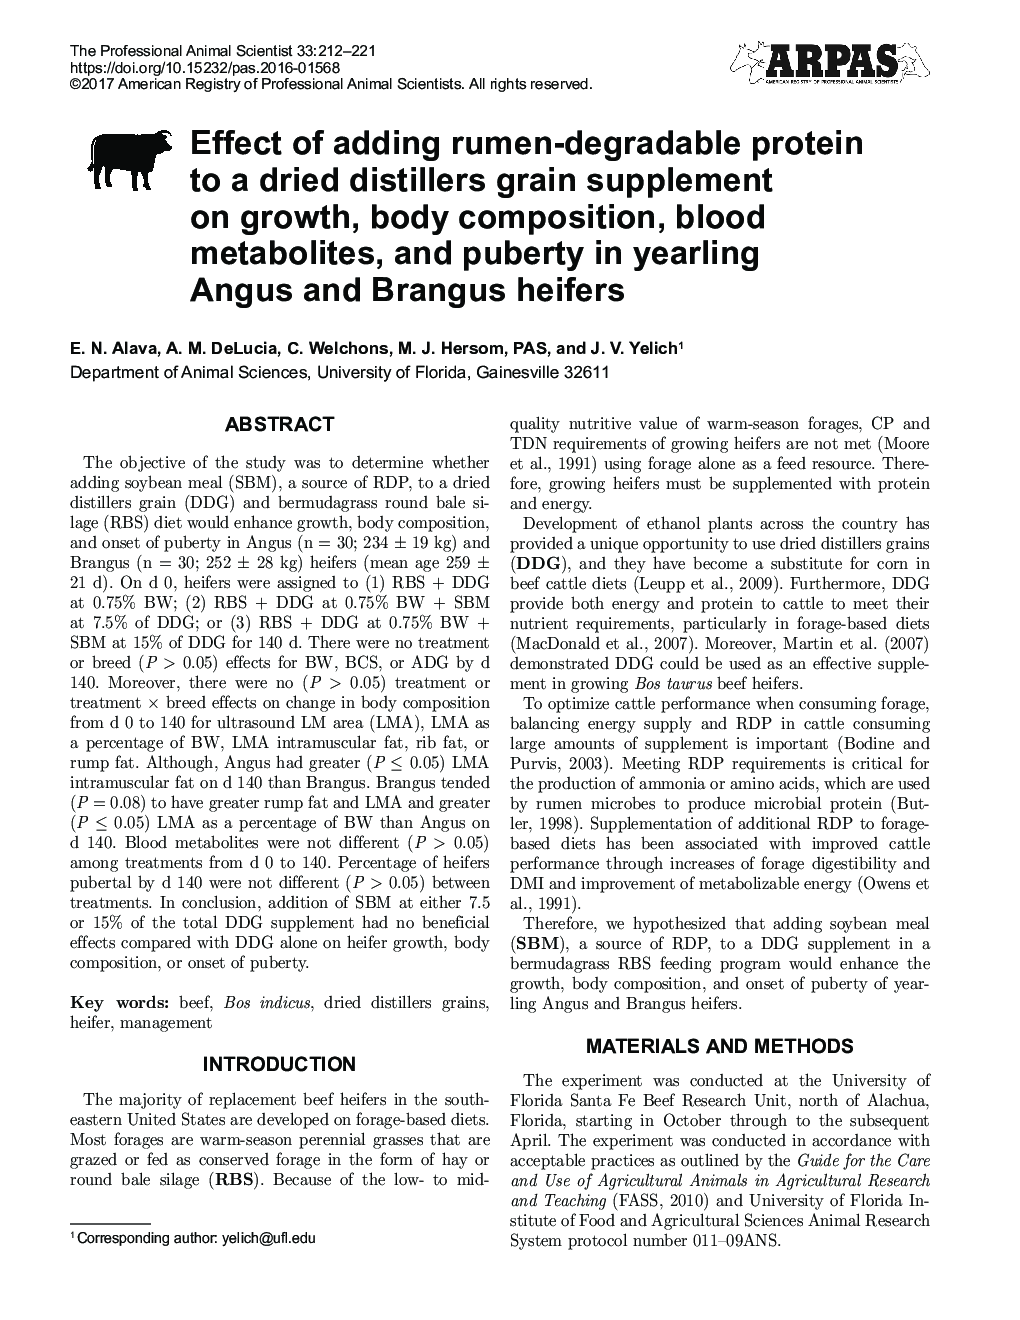 Effect of adding rumen-degradable protein to a dried distillers grain supplement on growth, body composition, blood metabolites, and puberty in yearling Angus and Brangus heifers